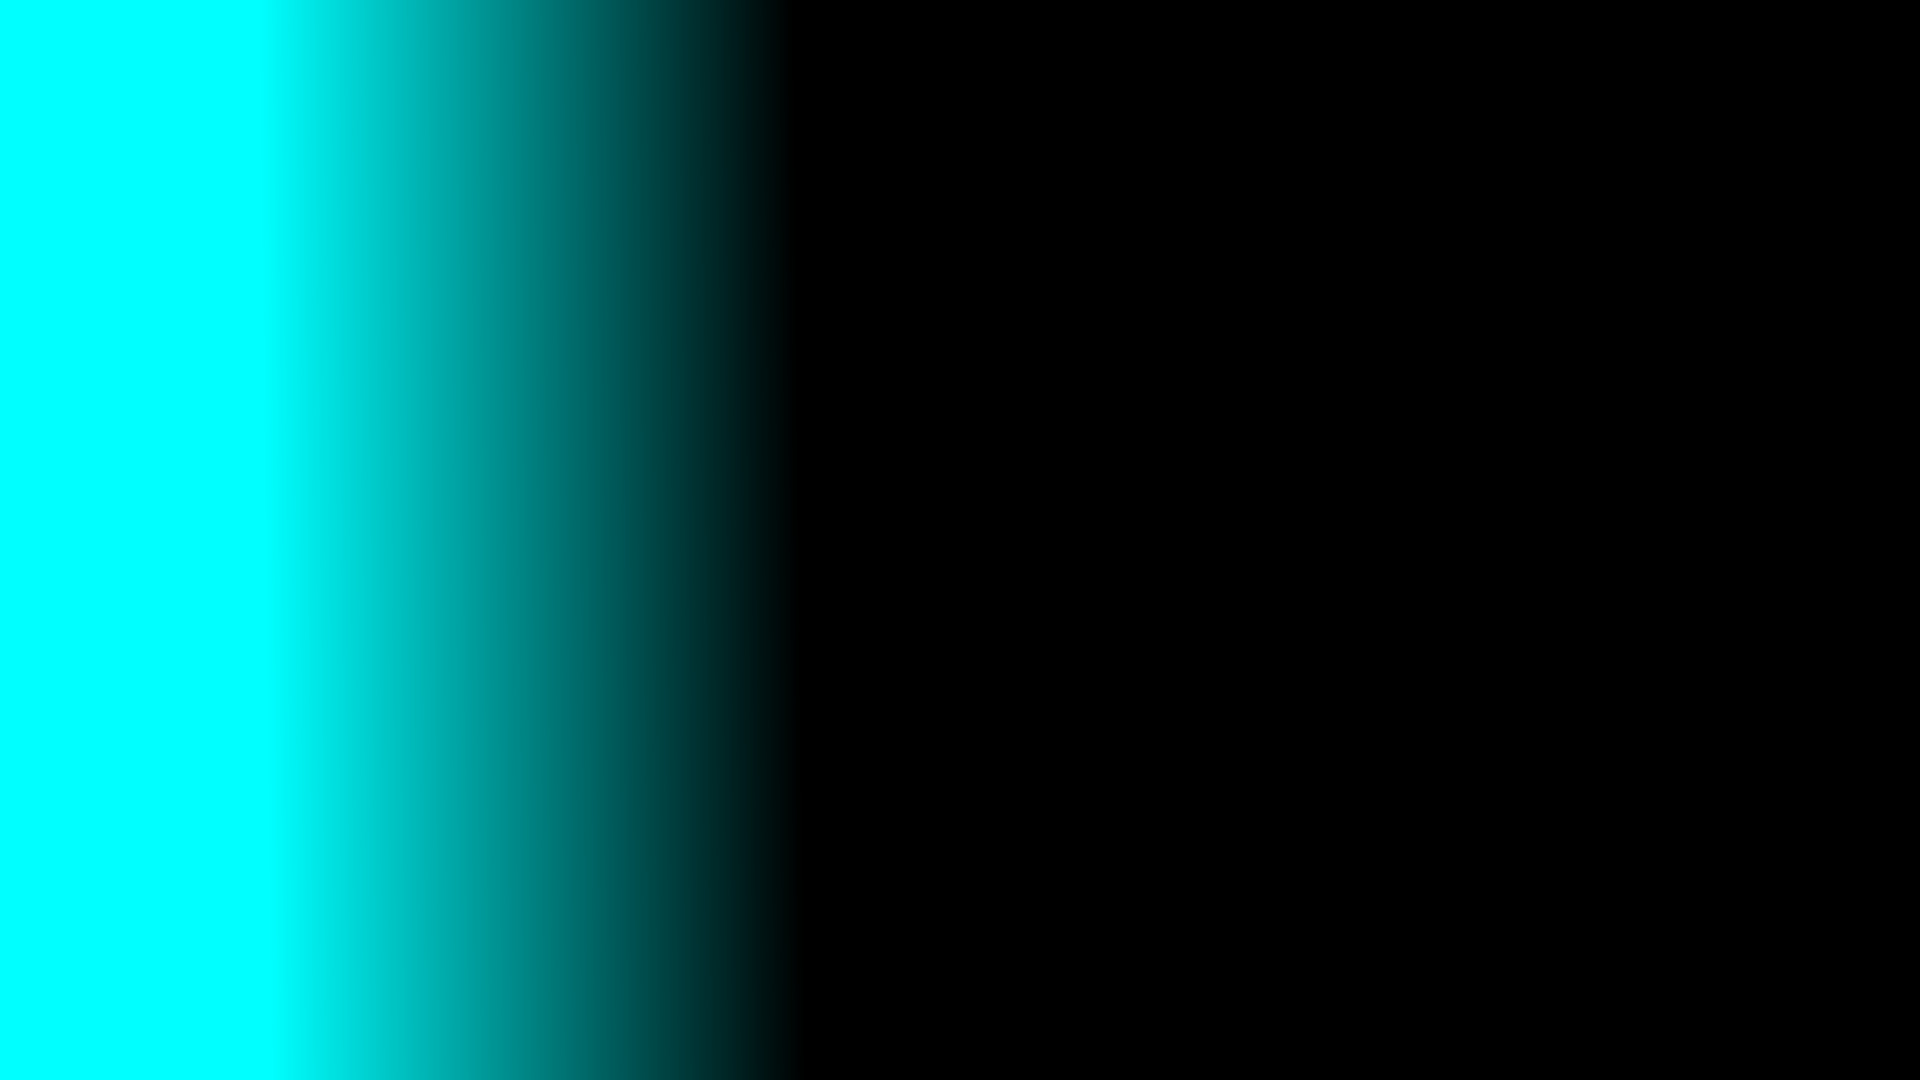 Teal And Black Wallpaper 55 Images